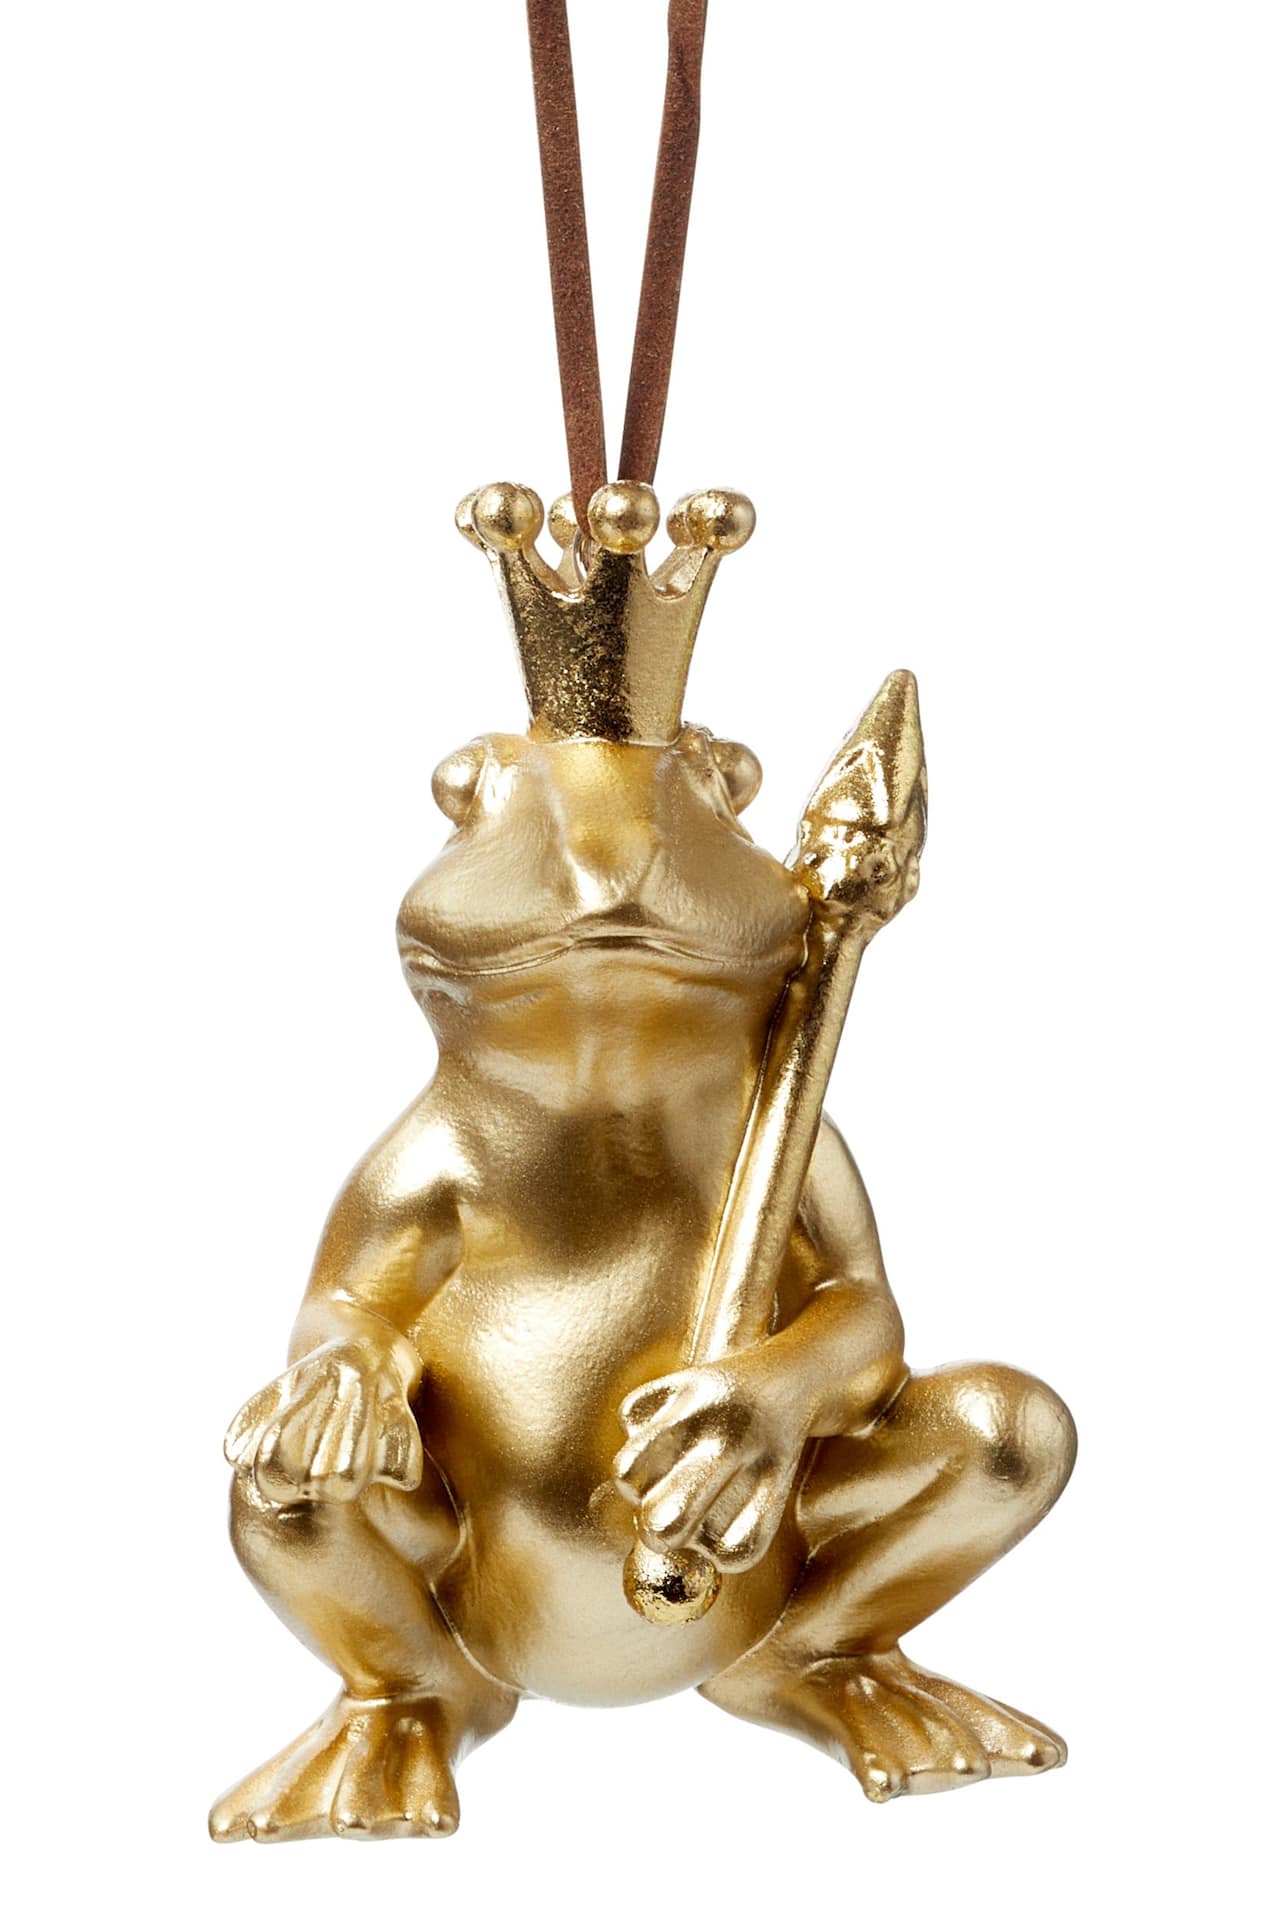 Wholesale Frog Prince Design Glass Water Pipe Smoking Accessories